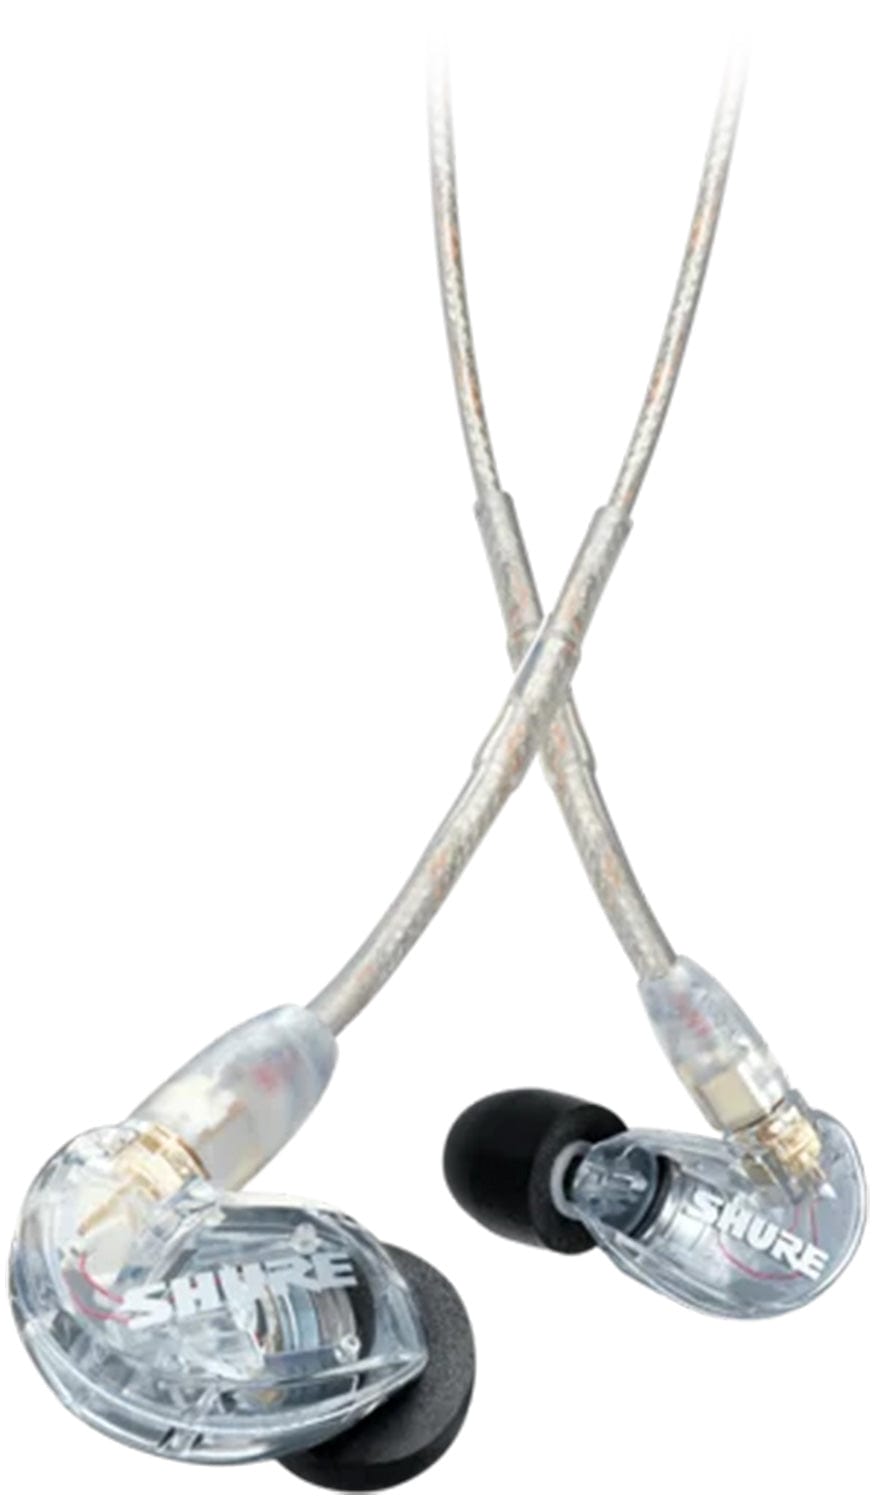 Shure In-Ear Earphones - PSSL ProSound and Stage Lighting